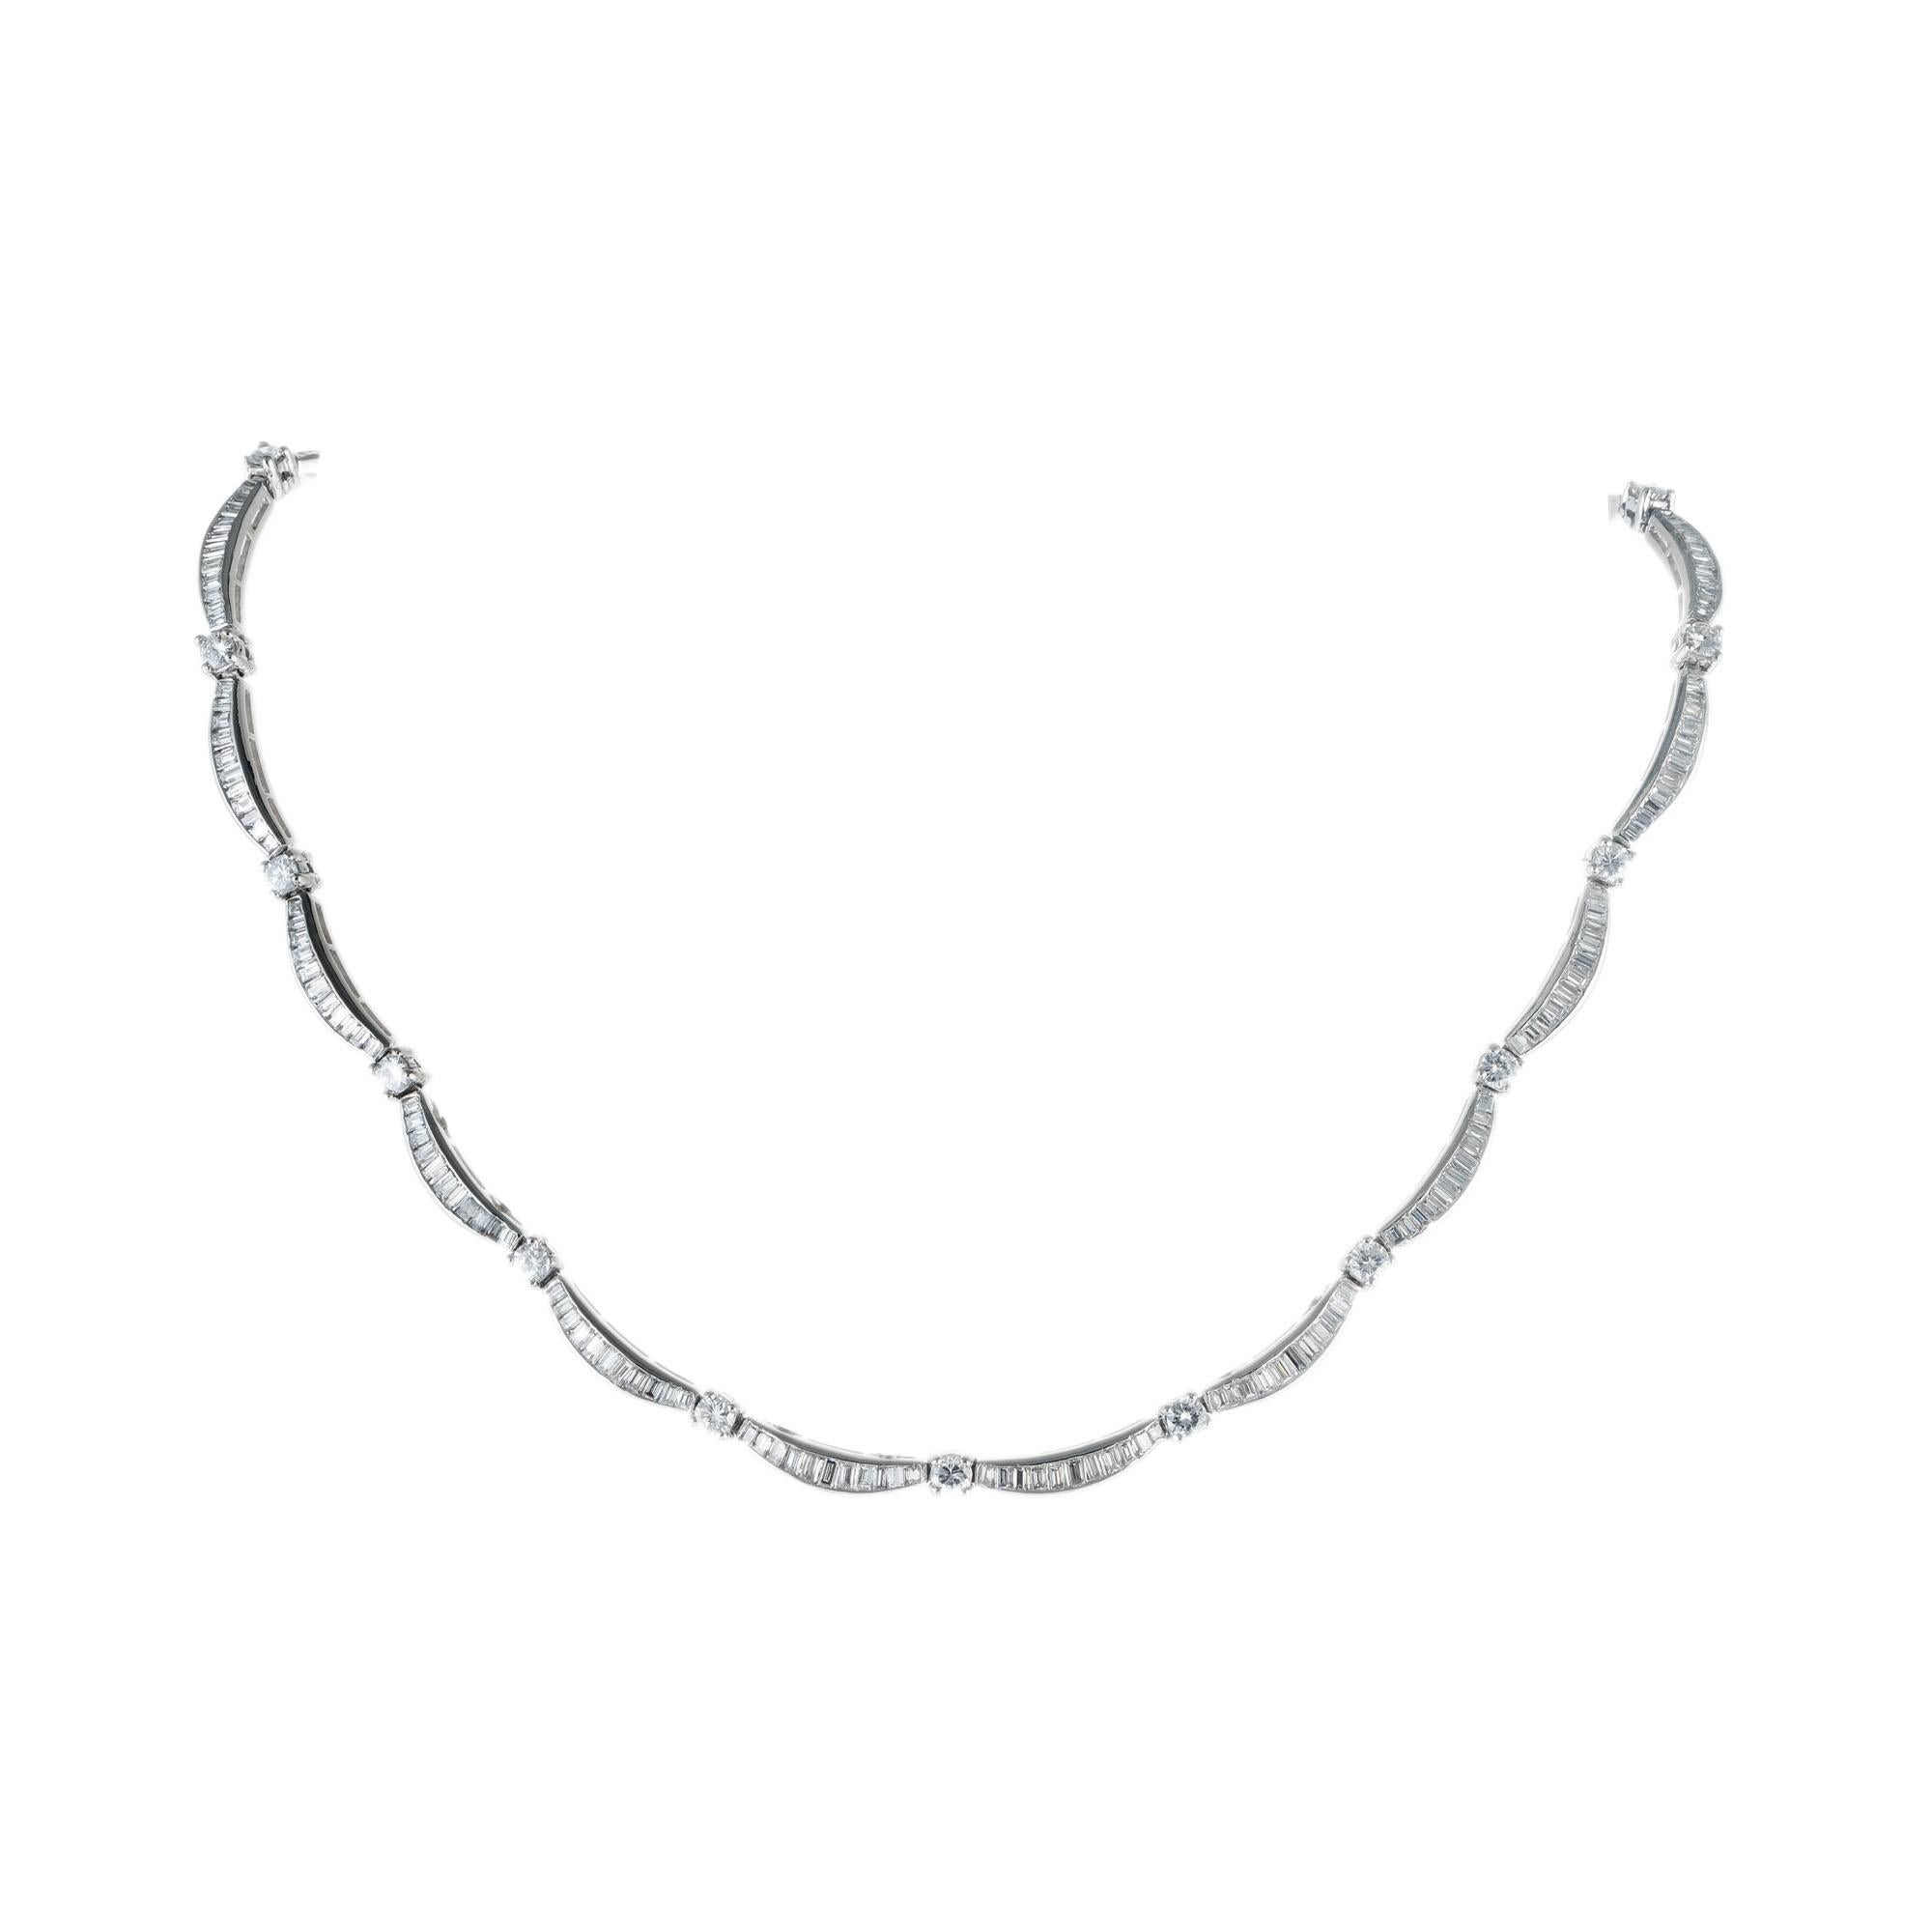 1950's diamond platinum necklace. 209 graduated straight baguettes separated by 19 round brilliant cut diamonds. Built in catch with underside safety. 15 inches long. 

19 round brilliant cut diamonds, G-H VS approx. 2.28cts
209 straight cut